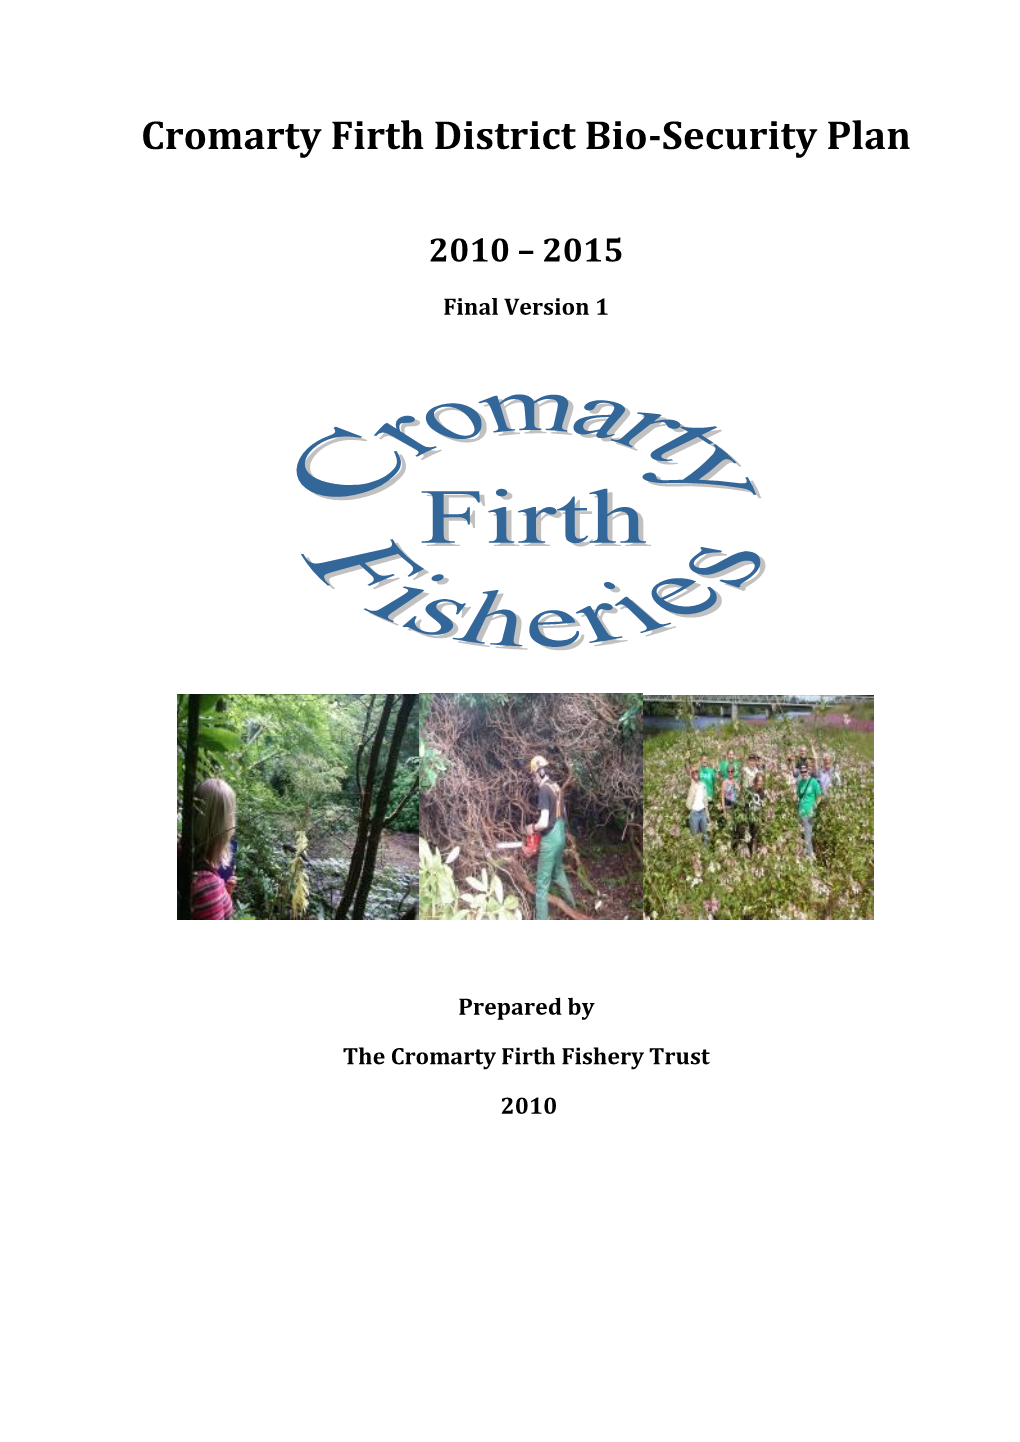 Cromarty Firth Biosecurity Plan 2010-2015